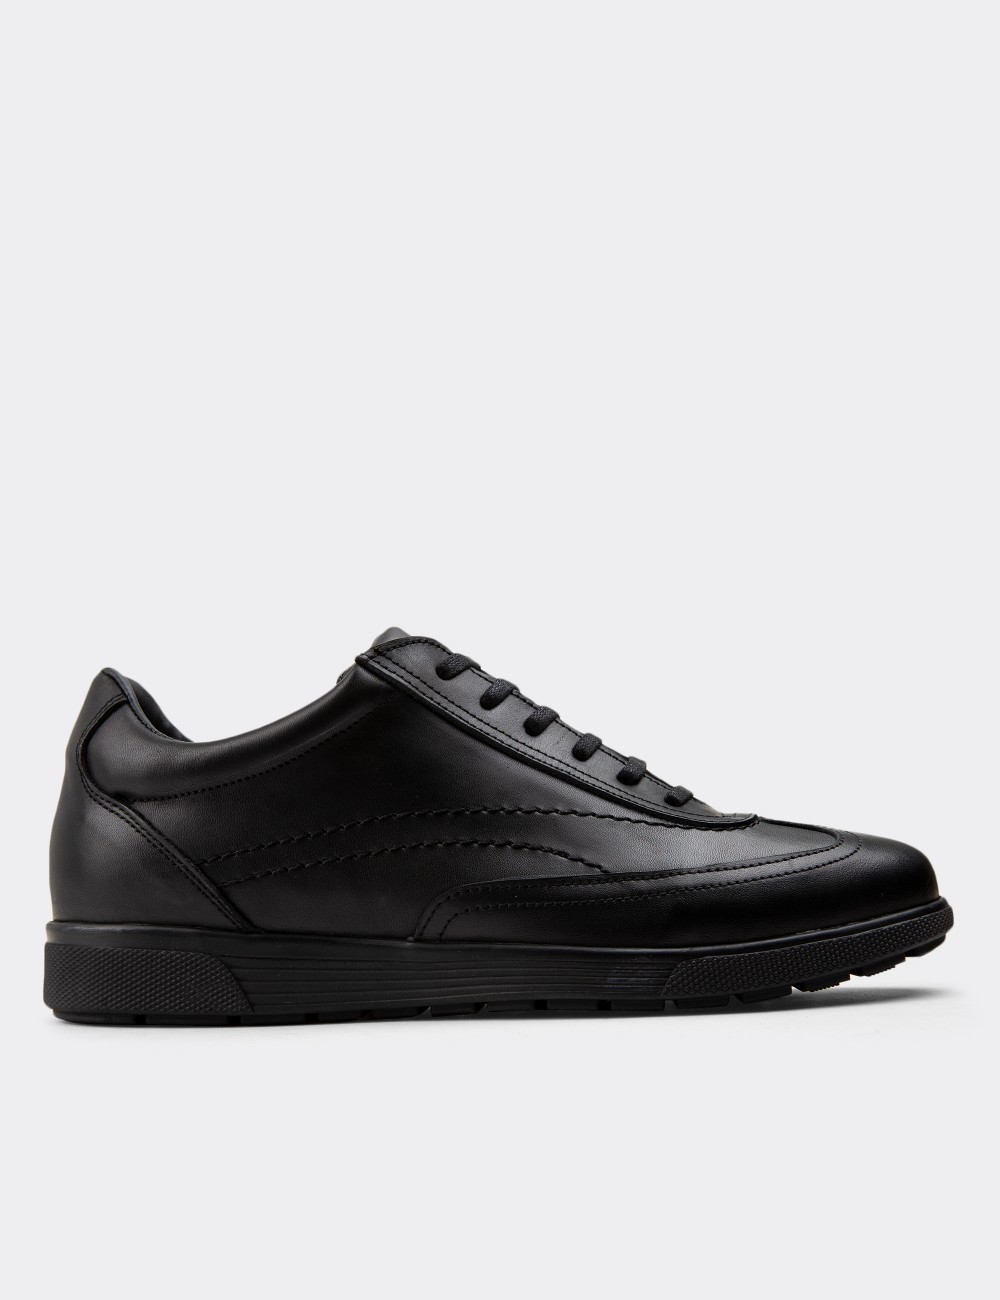 Black  Leather Lace-up Shoes - 00321MSYHC07